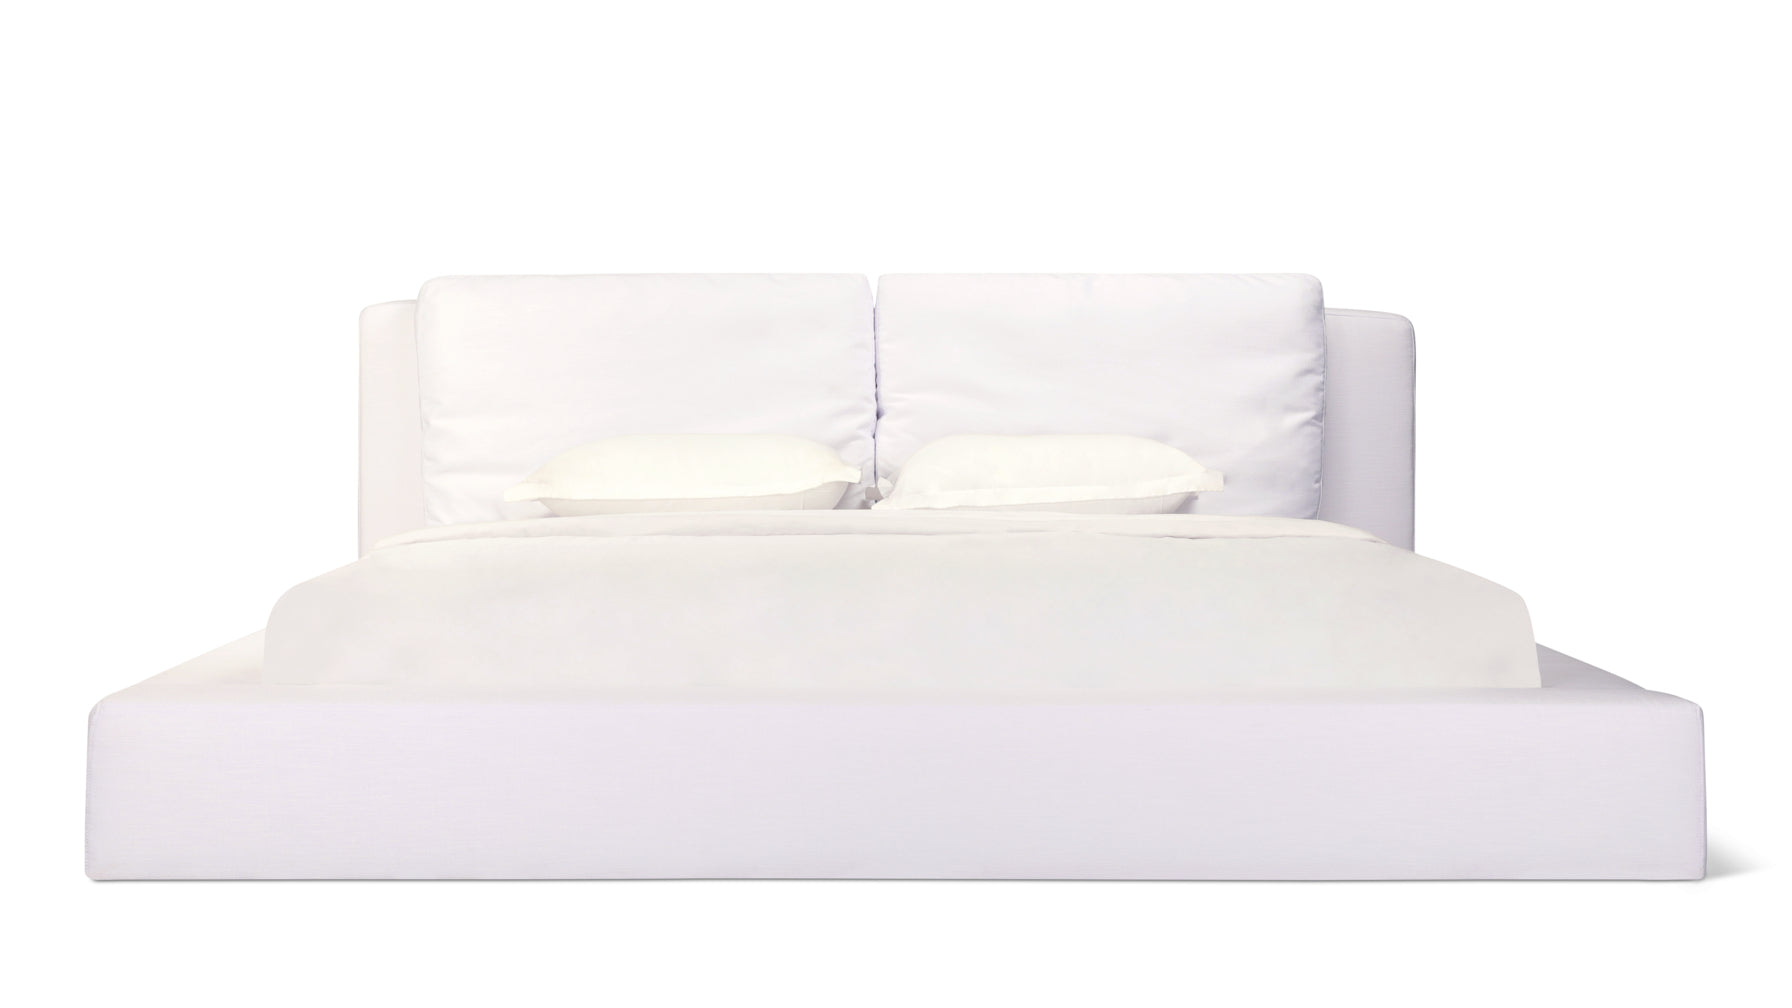 Movie Night™ Bed, Queen, White - Image 1